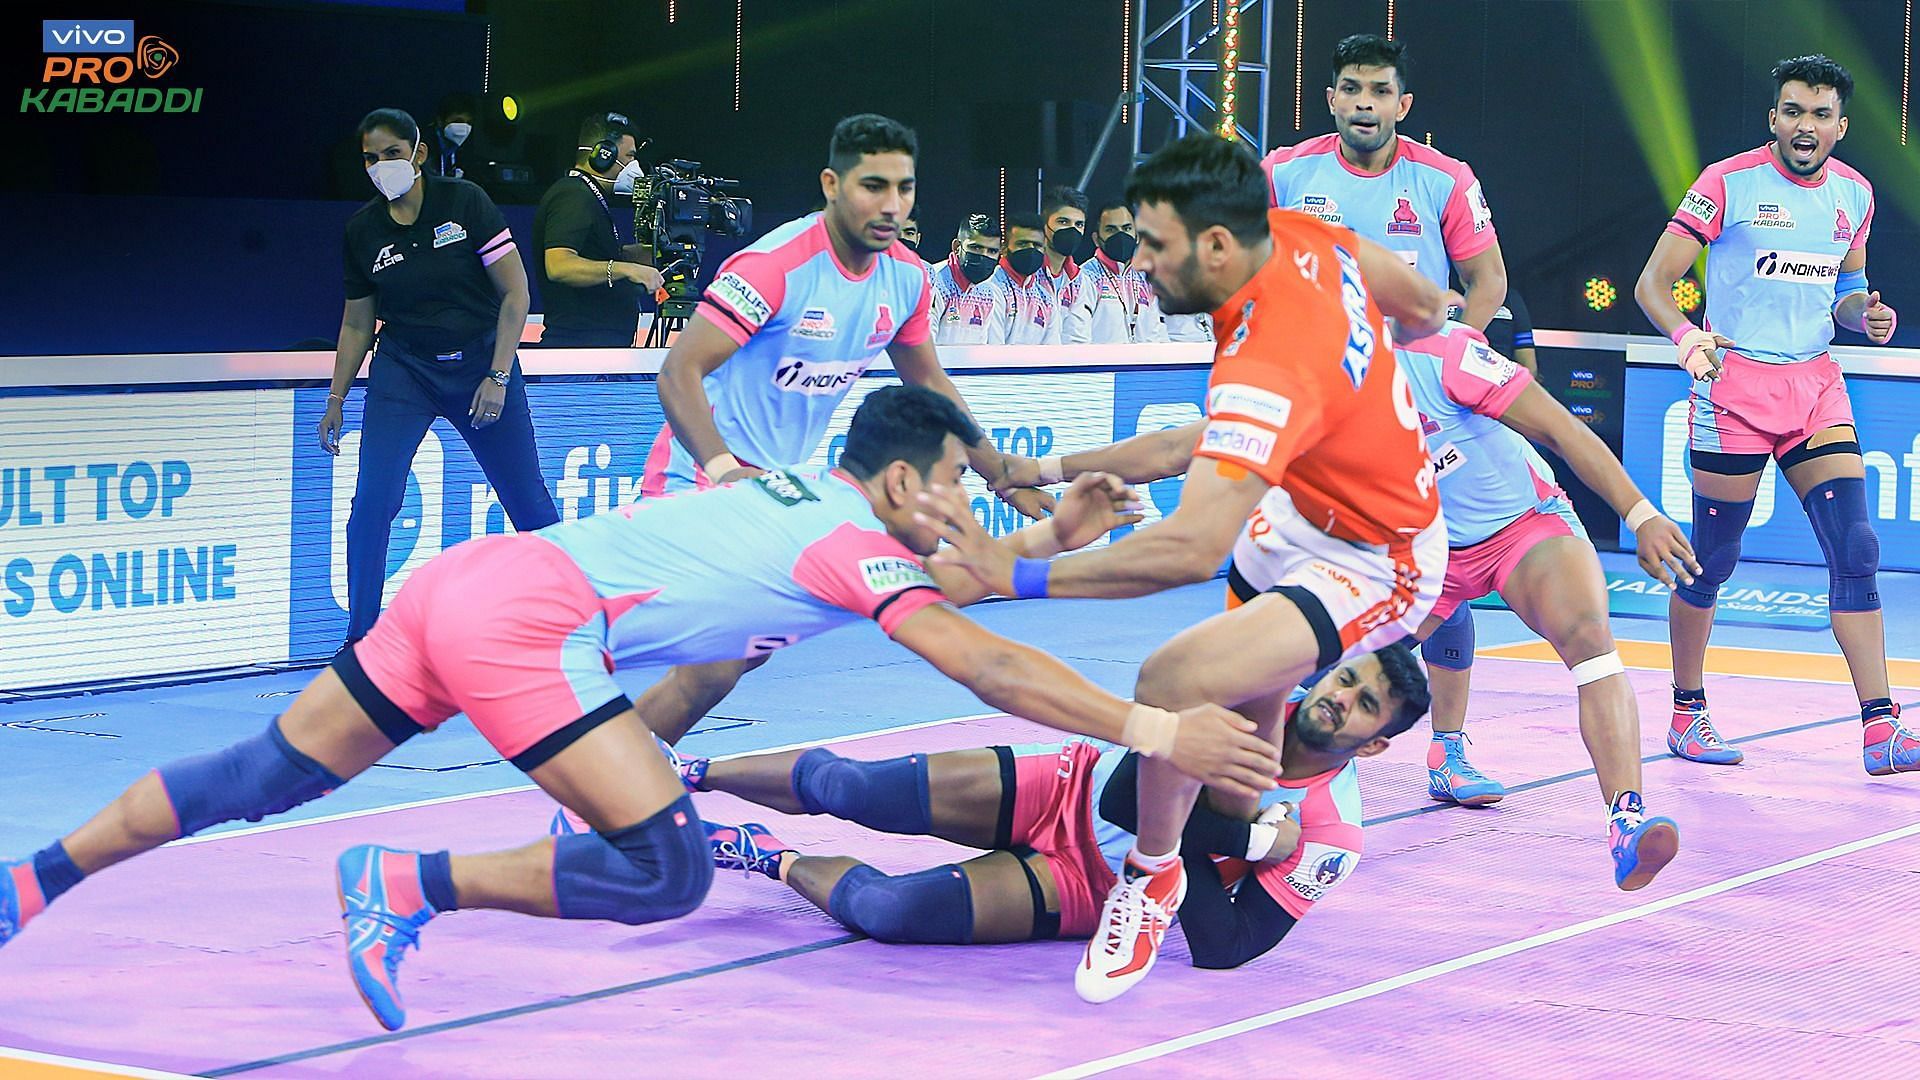 Gujarat Giants could not defeat the Jaipur Pink Panthers in the first match of the night. (Image Courtesy: PKL/Facebook)